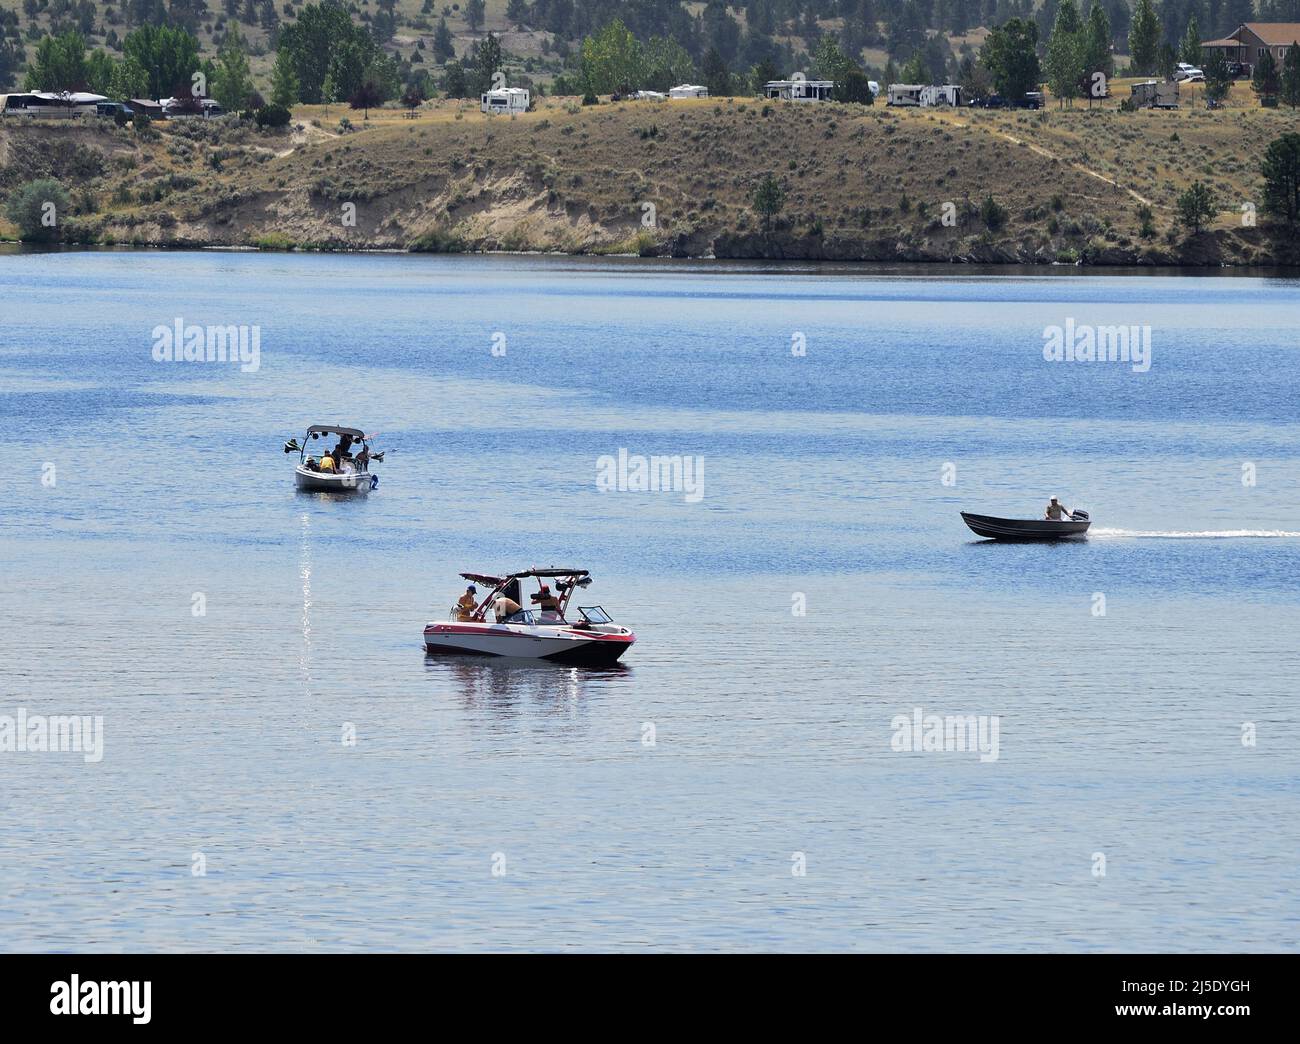 People enjoy a day on the lake.in different types of boats. Stock Photo